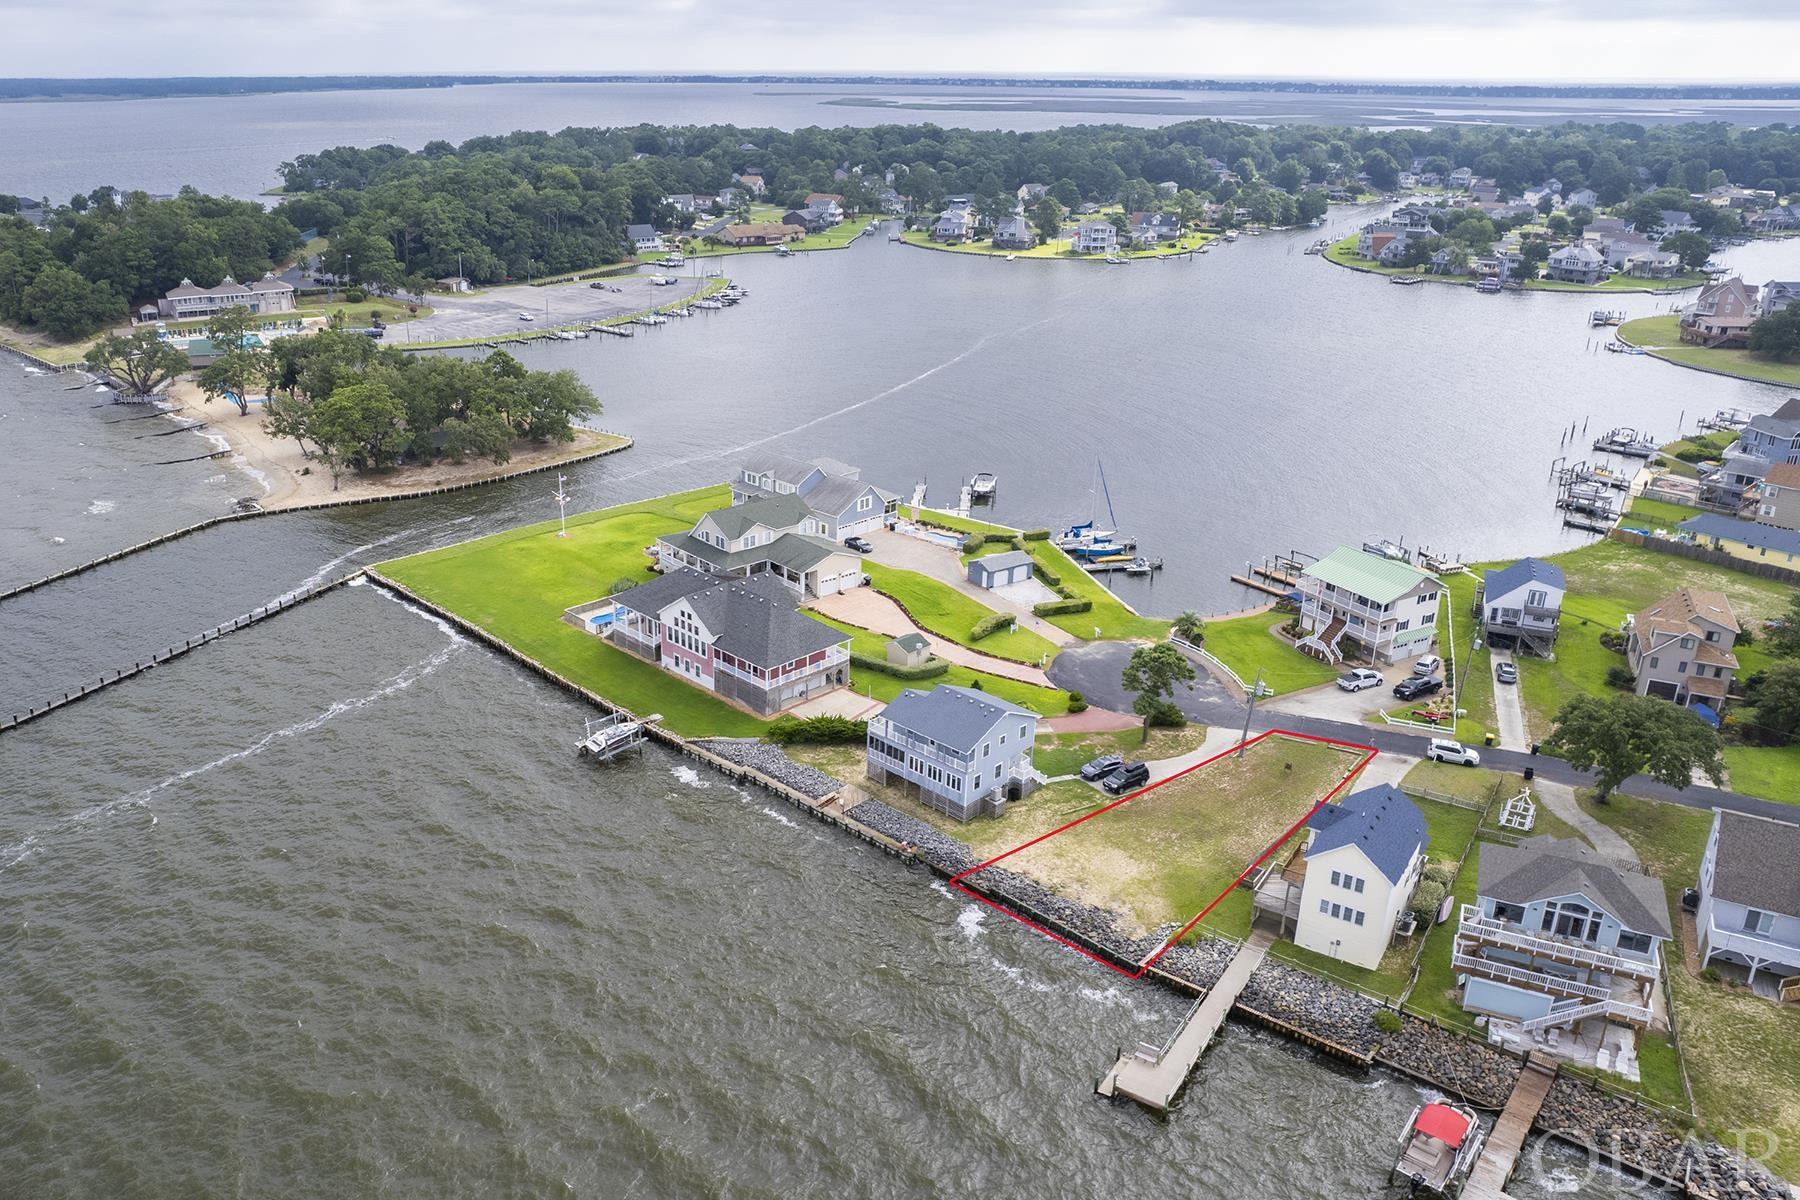 Build your dream home with views that most may only hope for!!  Imagine having the wide open waters in your backyard.  With 74 feet of water frontage you're sure to embrace a "waterman's lifestyle".  The cleared, level lot, combined with a newer bulkhead, allows you to start your new build without all the land prep hassle! Seller is even willing to share house plans as a bonus...talk about having the work done for you!!   Drone shots coming later today/tomorrow!